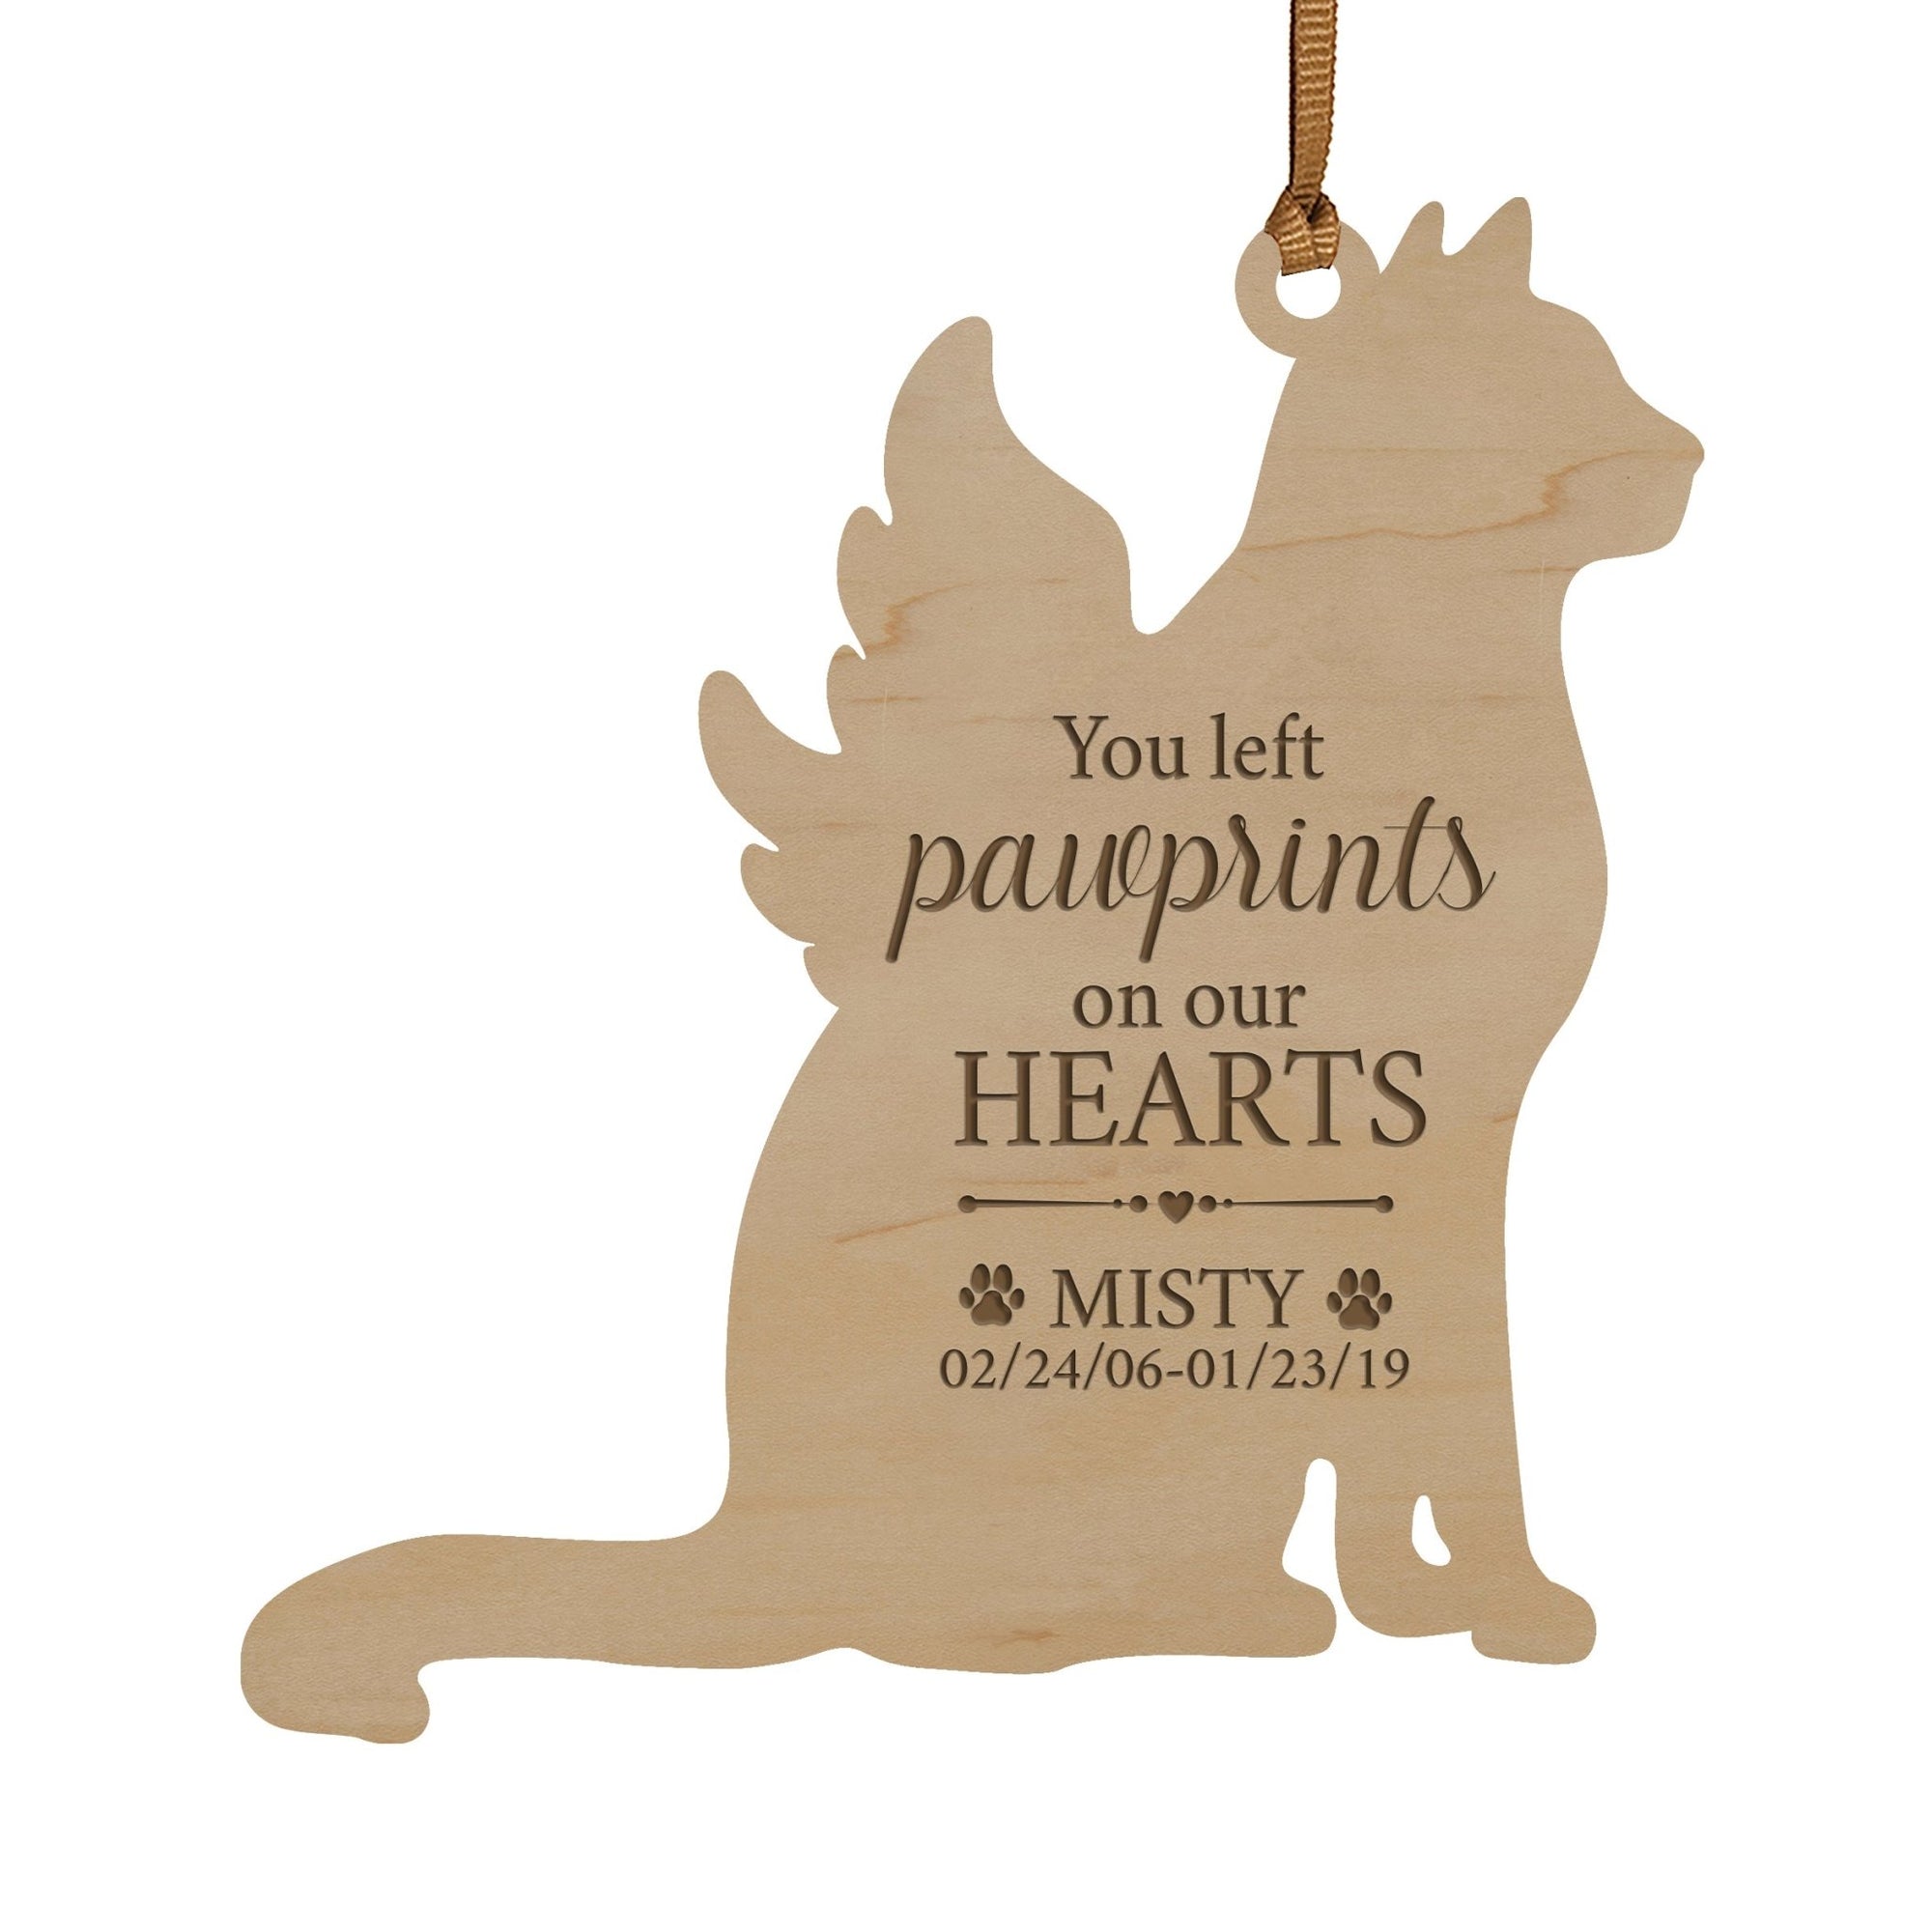 Personalized Engraved Memorial Cat Ornament 4.9375” x 5.375” x 0.125” - You left pawprints (PAWS) - LifeSong Milestones